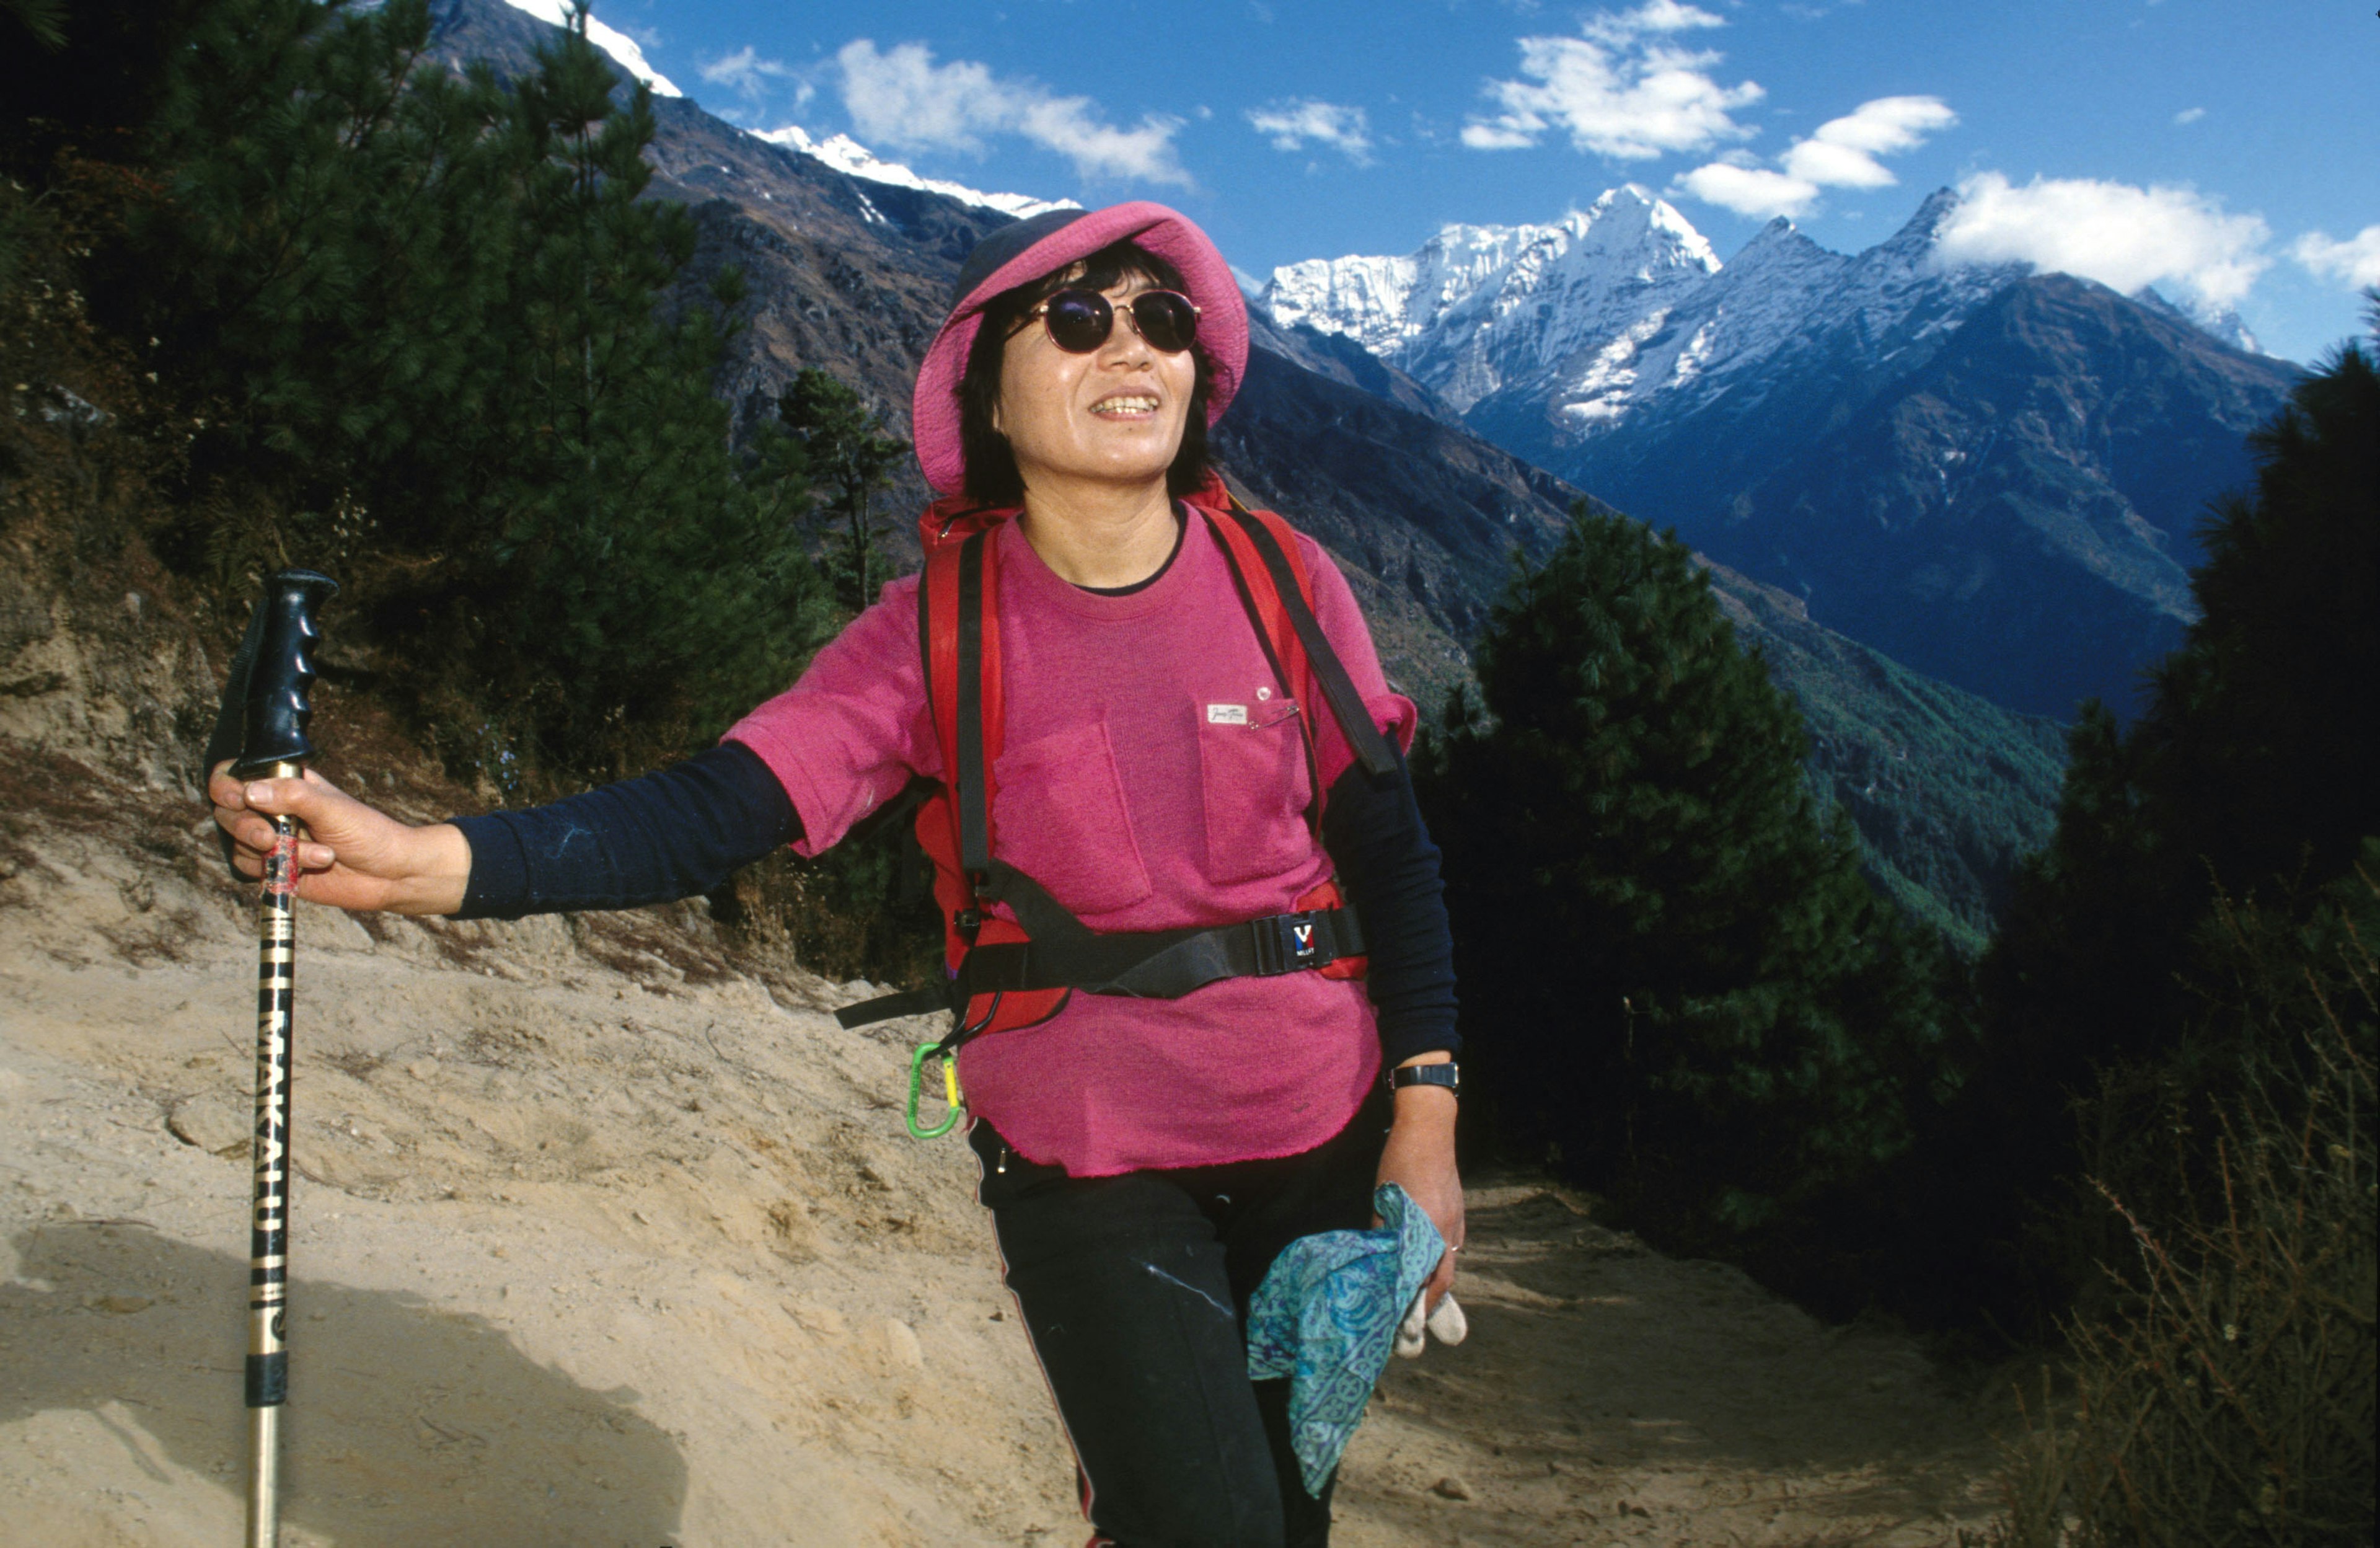 Junko Tabei, from Japan, was the first woman to reach the summit of Everest on May 16, 1975, at the age of 35. Despite being injured in an avalanche at Camp II with 7 other Japanese expedition members, including 6 Sherpas twelve days before, she succeeded in conquering Everest. (Photo by John van Hasselt/Corbis via Getty Images)